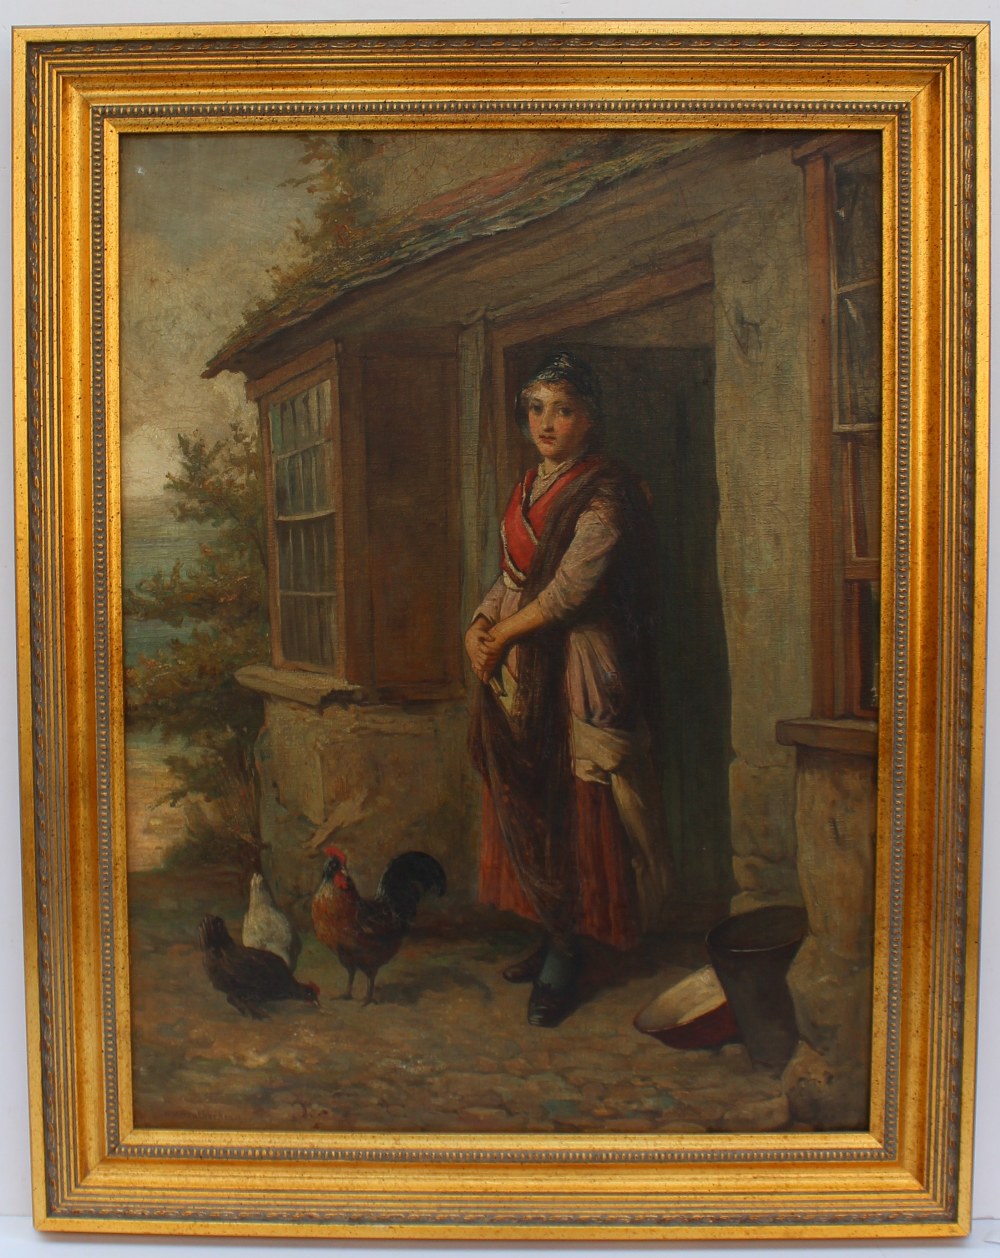 W H Weatherhead
A figure standing in a cottage door 
Oil on Canvas
Signed
59 x 44cm - Image 2 of 4